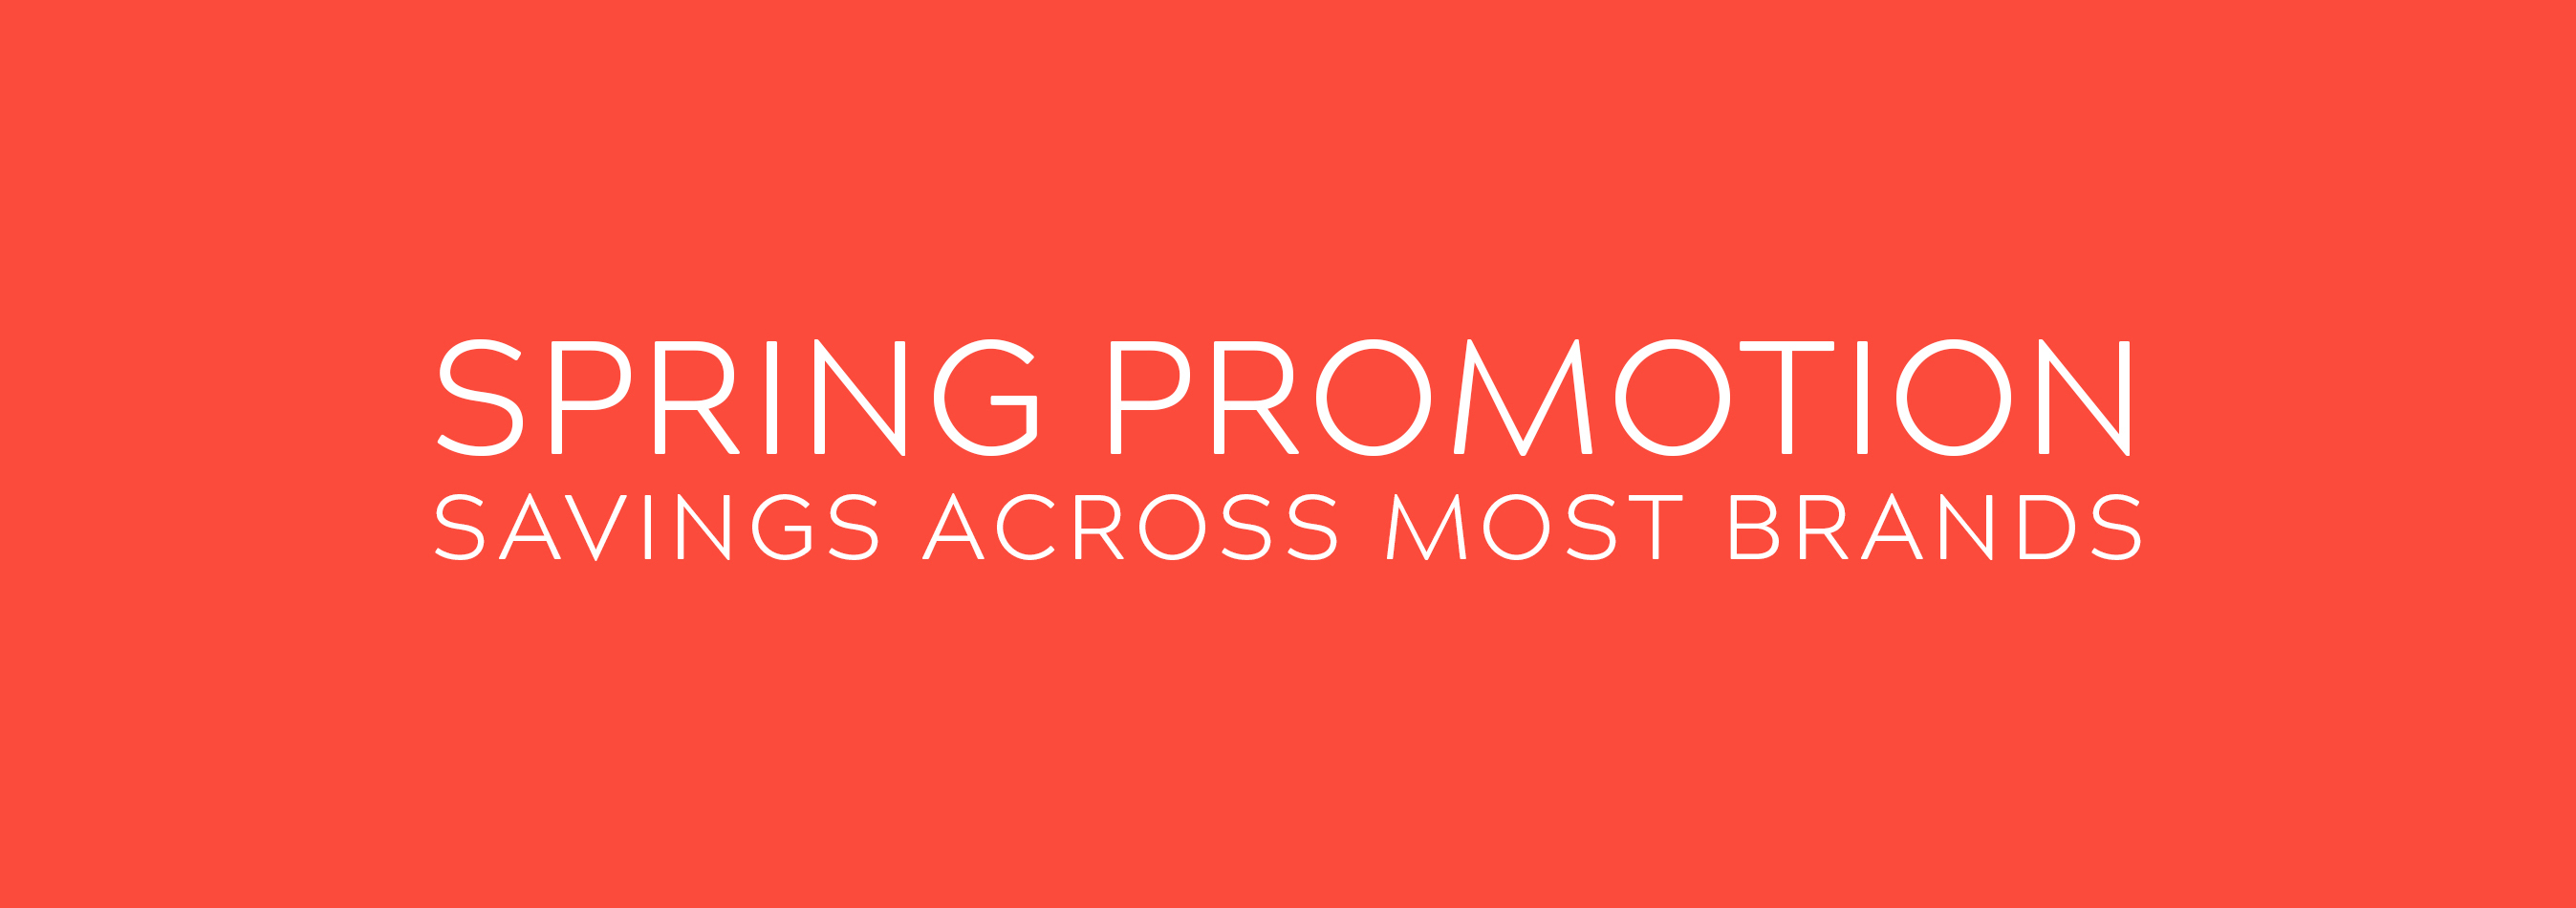 Spring Promotion - Savings across most brands